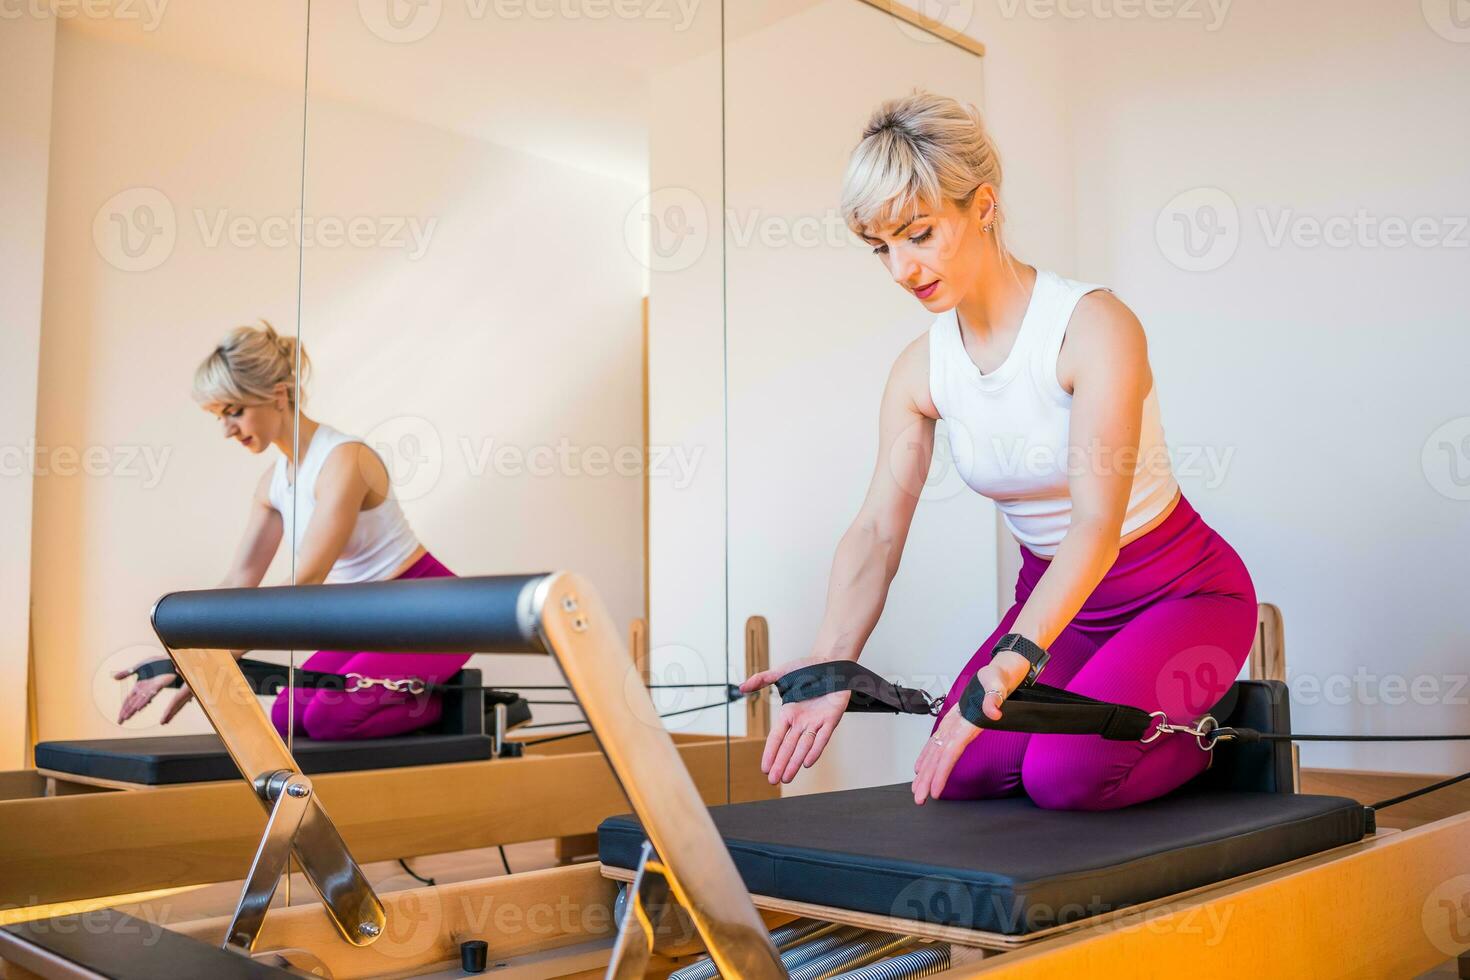 Blonde woman is exercising on pilates reformer bed in her home. photo